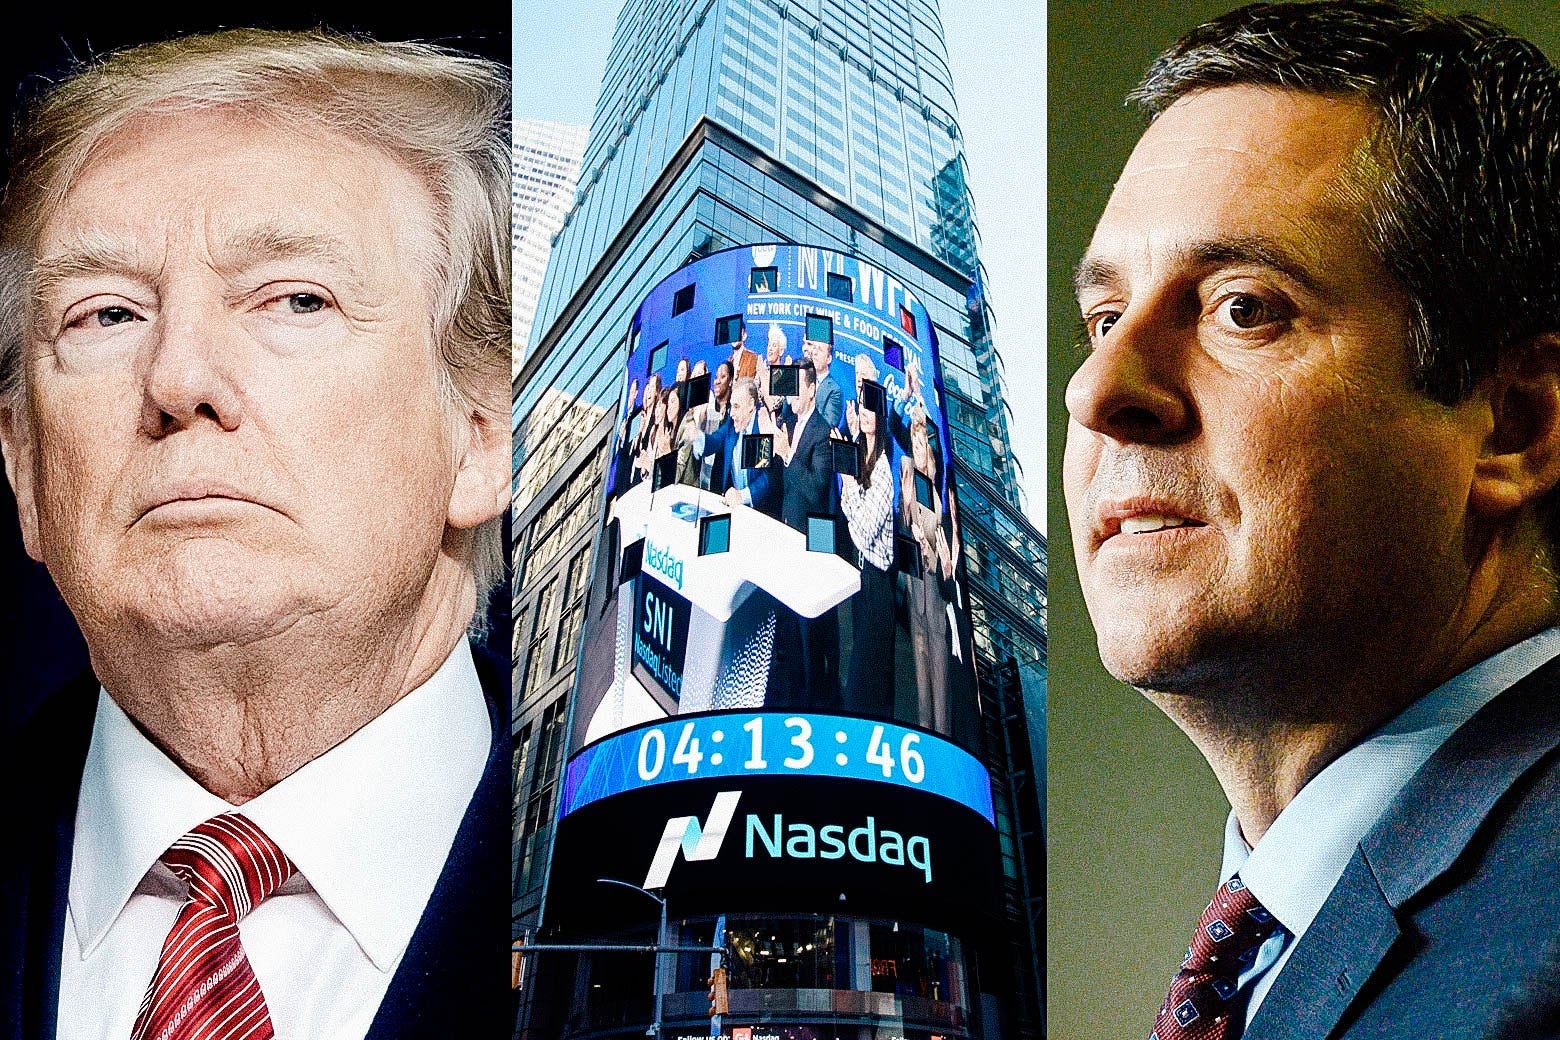 Triptych of Trump and Nunes in close-up on either side of a cylindrical screen advertising Nasdaq under a New York City skyscraper.